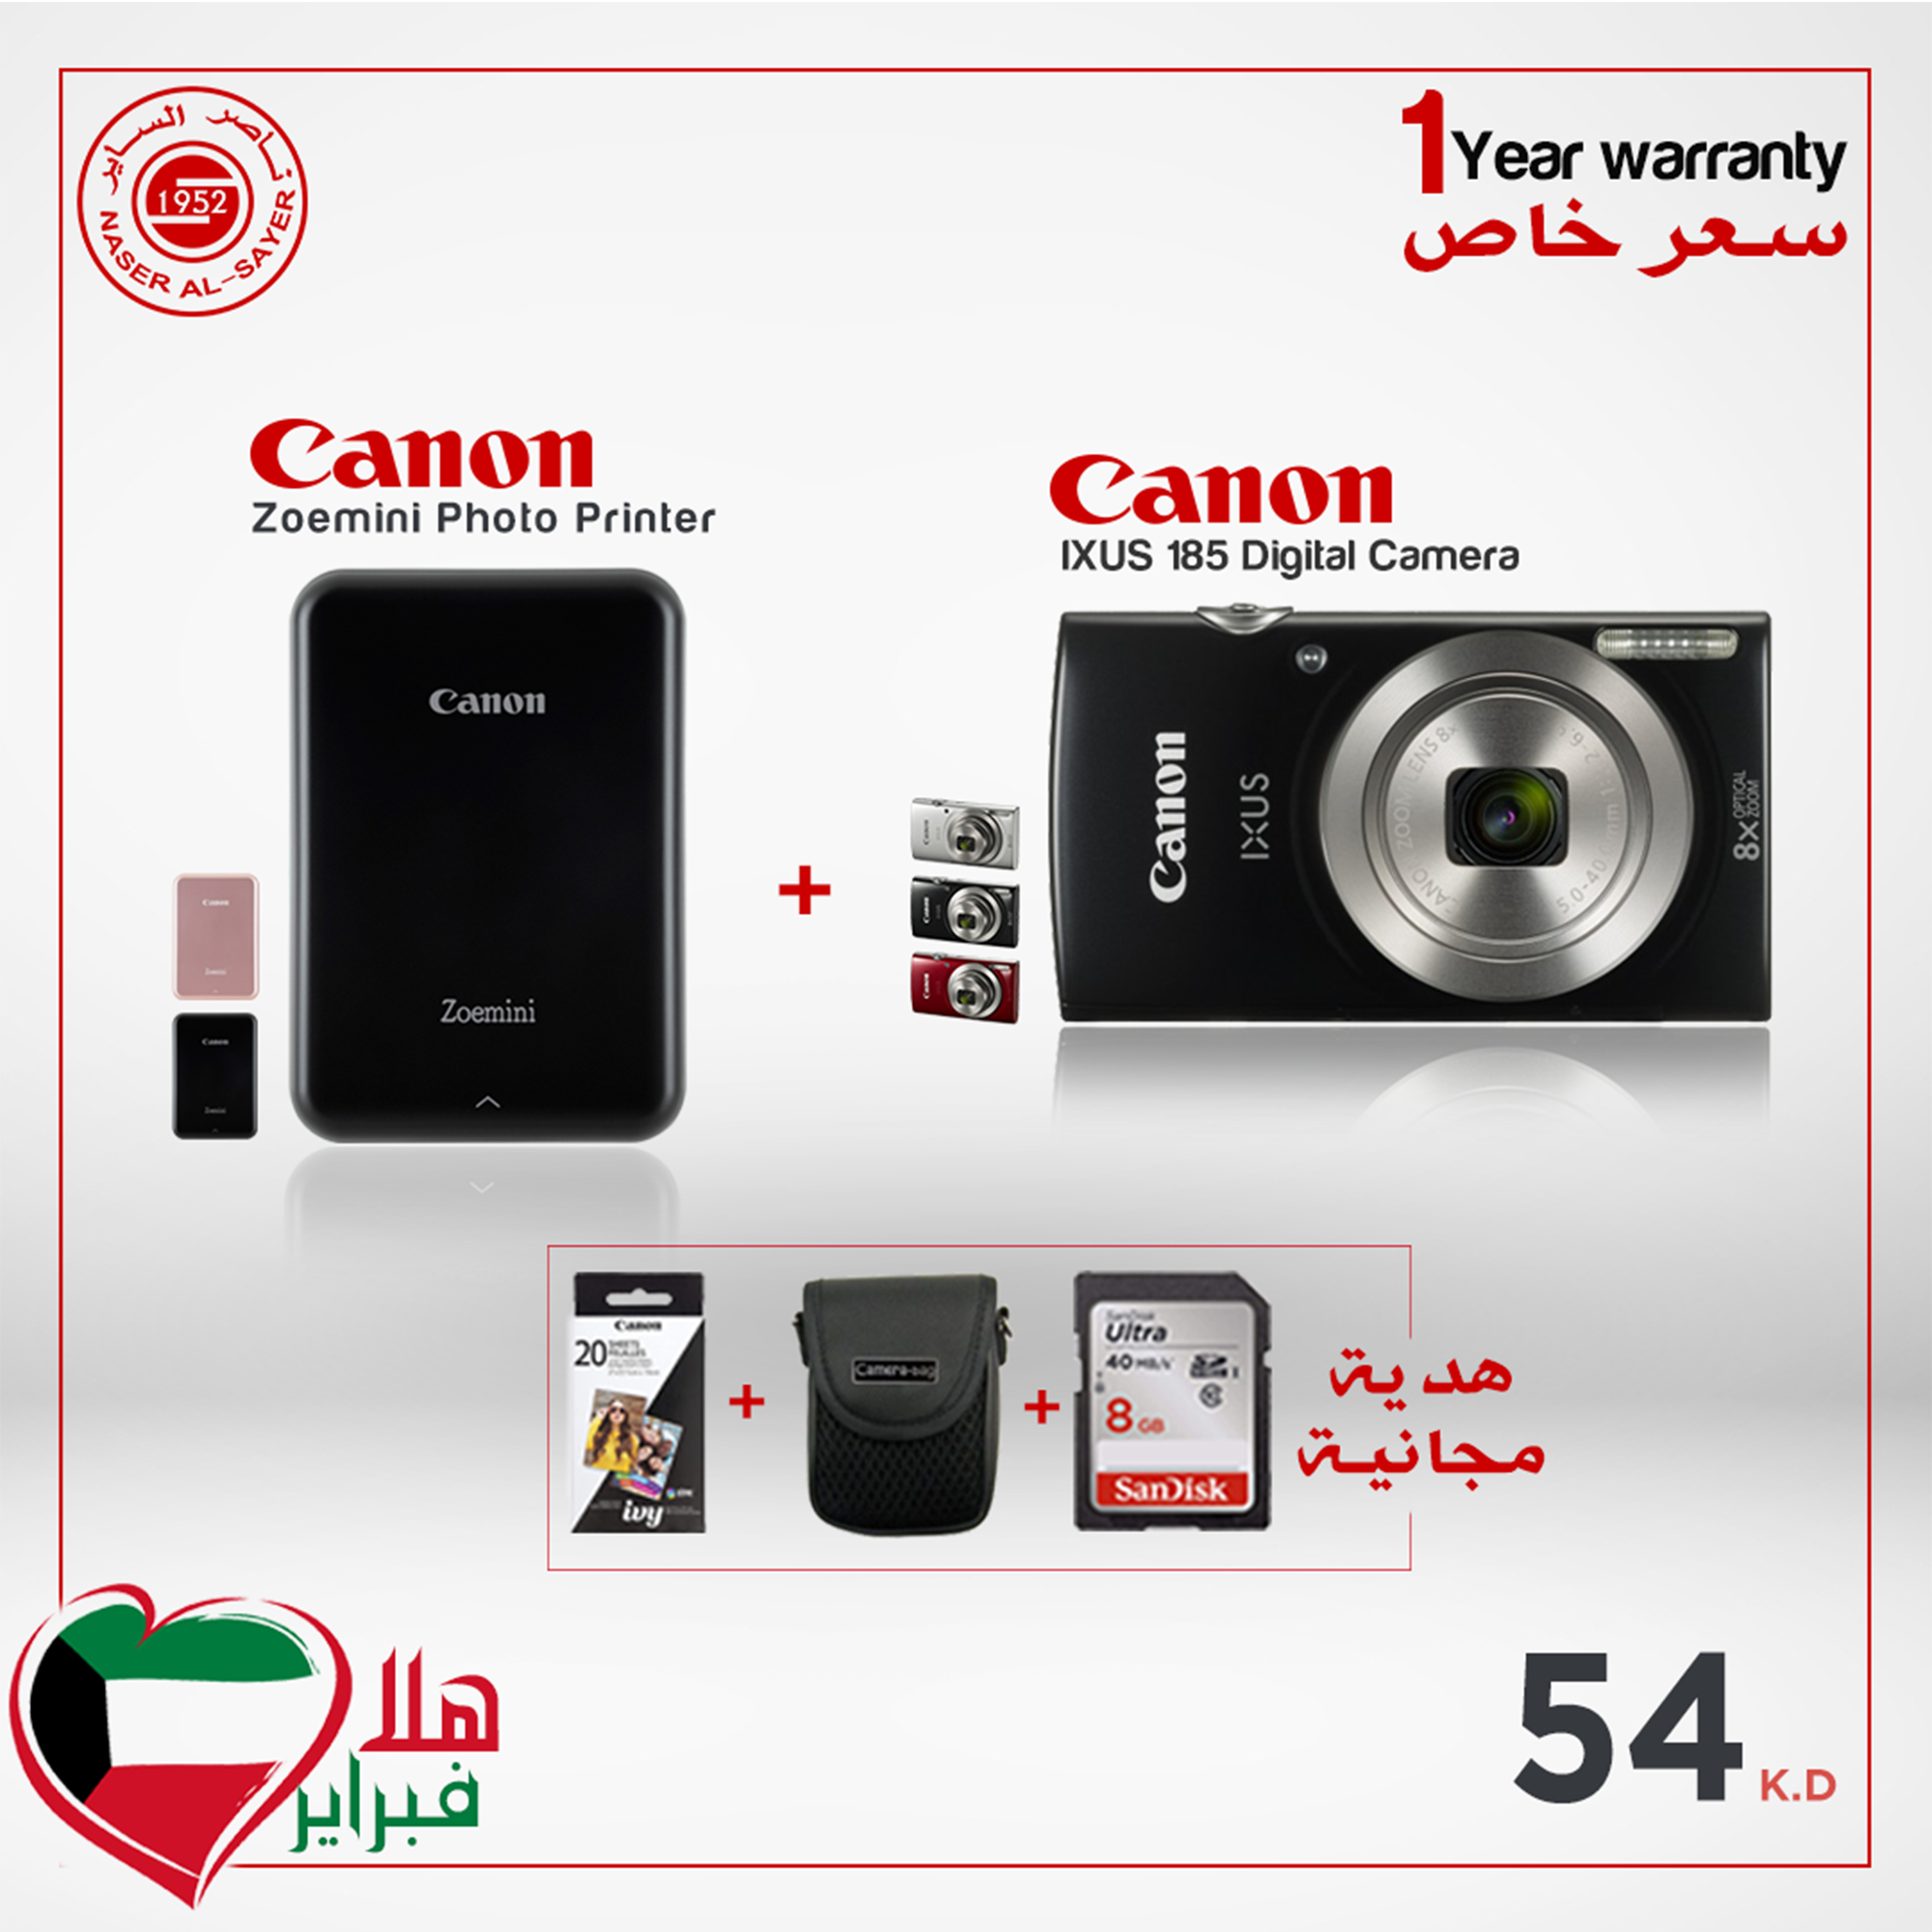 CANON IXUS 185 BLACK With  FREE BAG & MEMORY 8 GB  + Canon Zoemini Printer With free Paper Packet